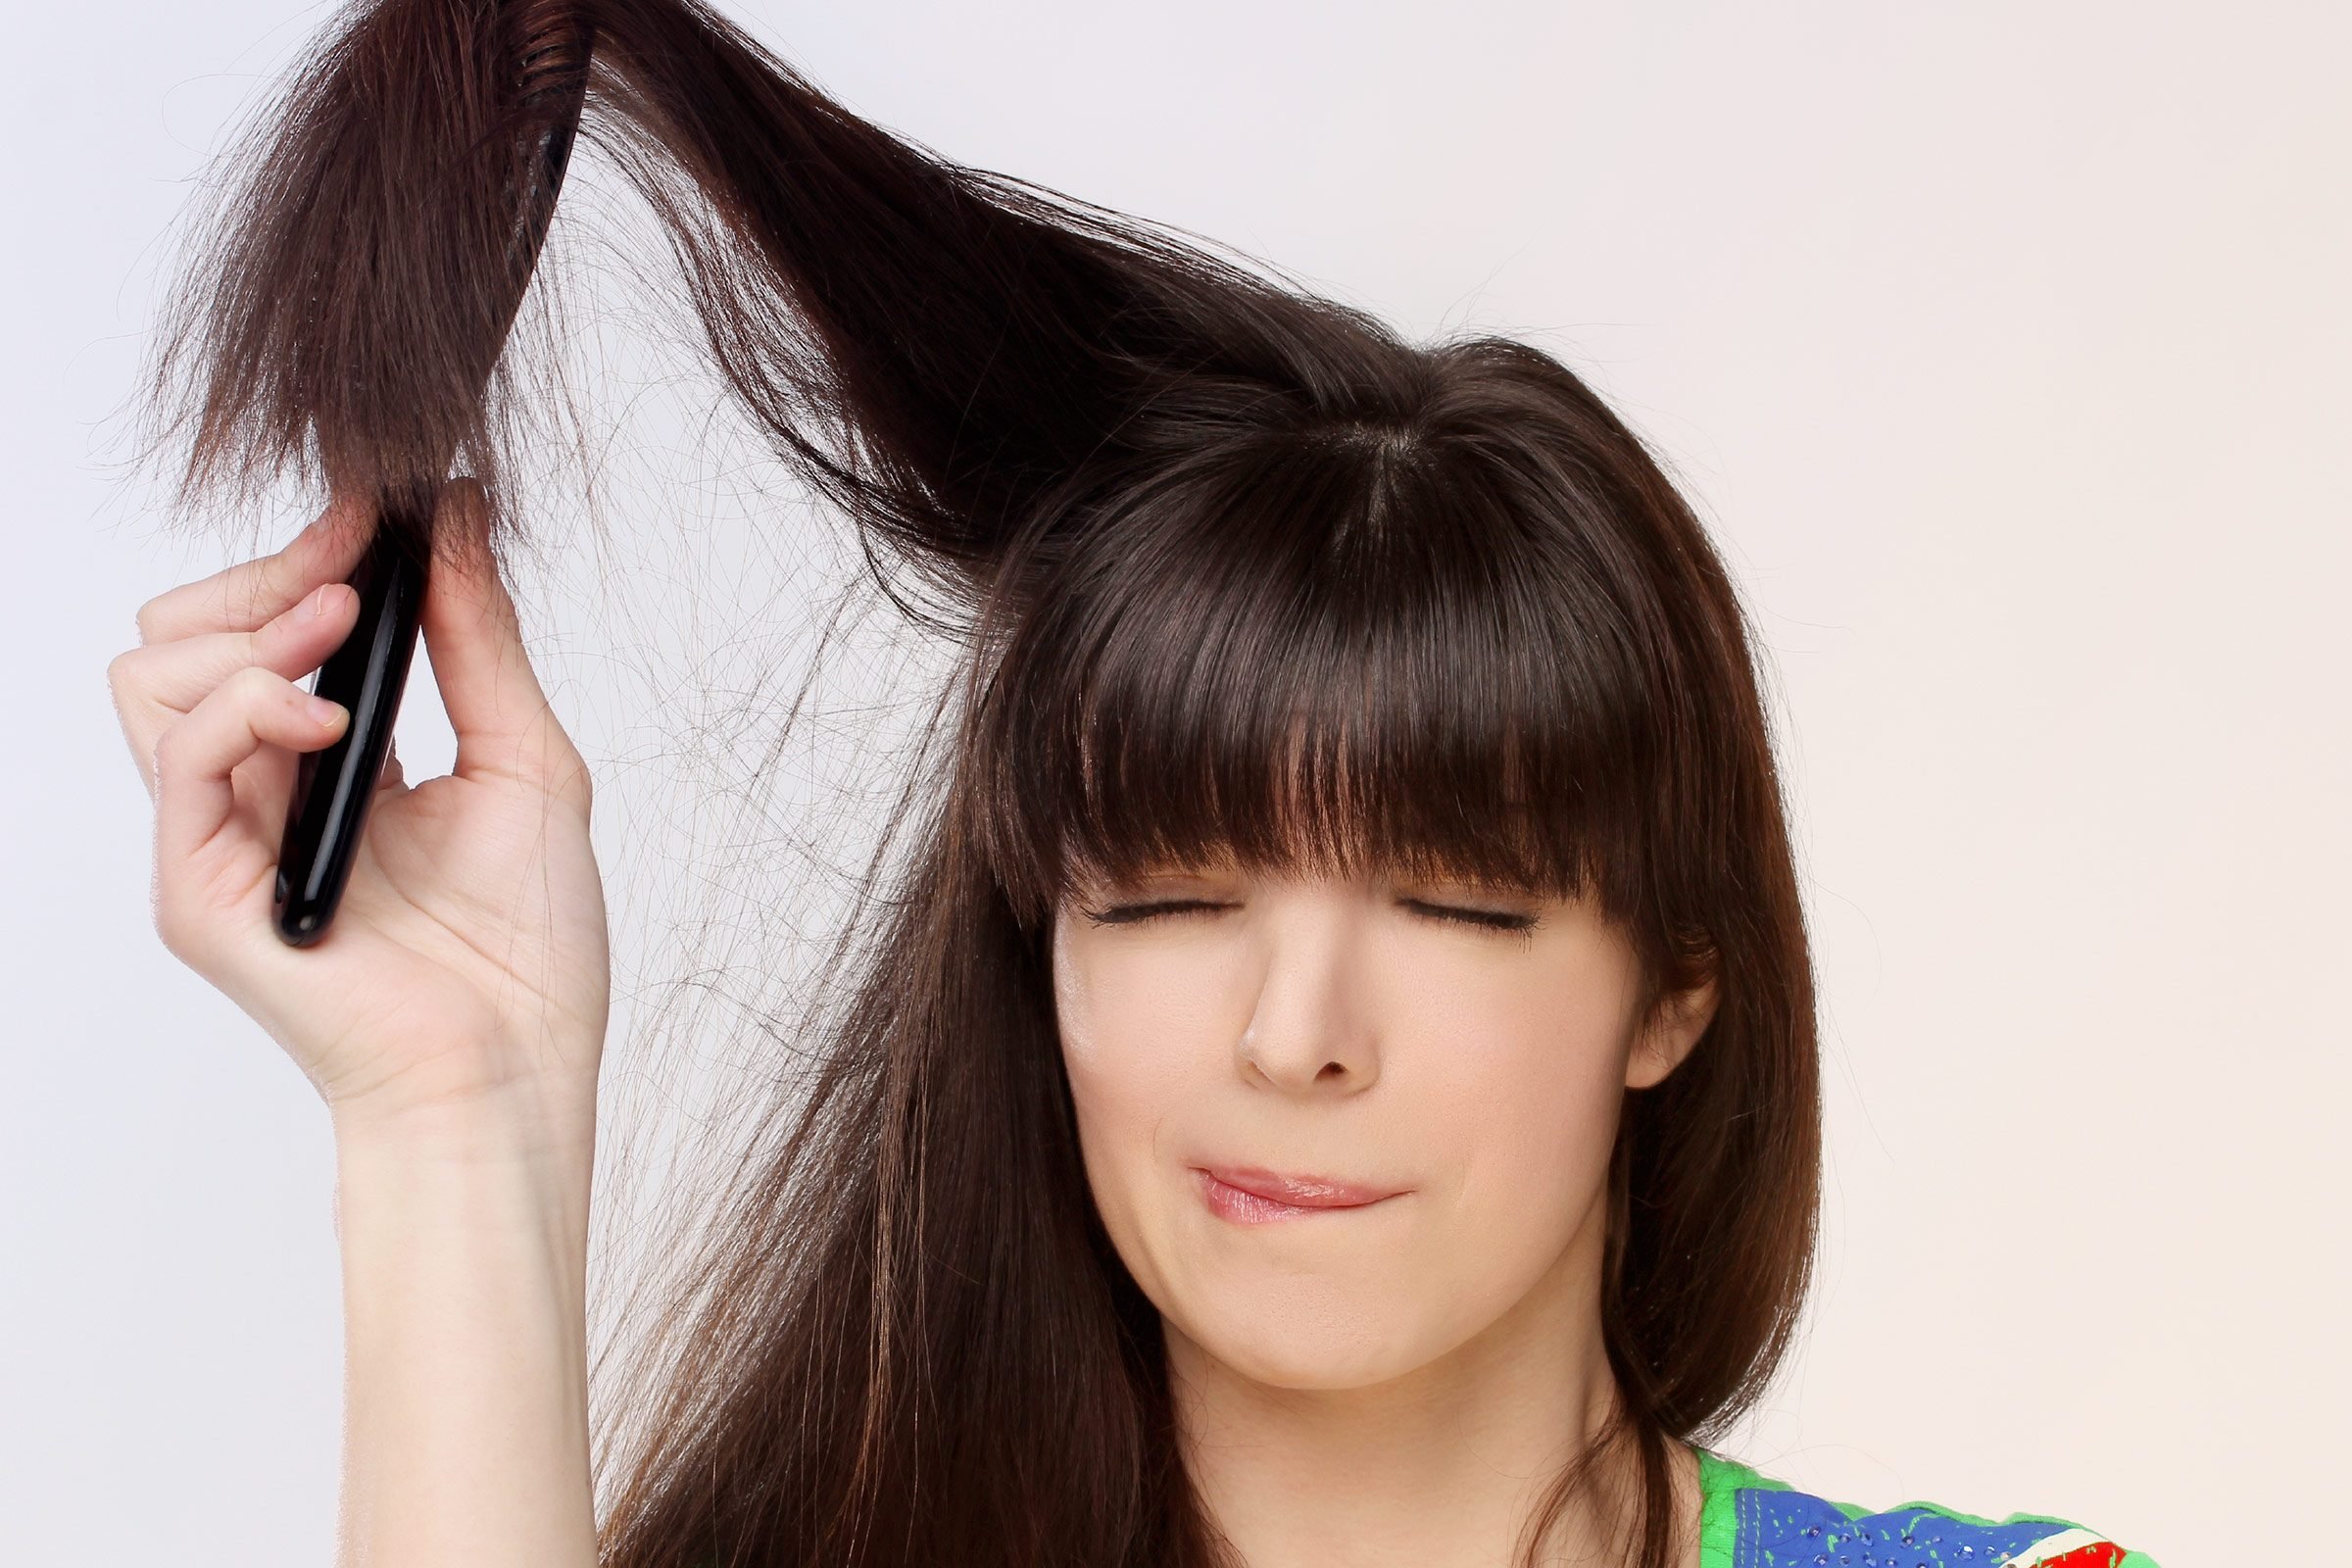 Surprising Myths and Facts About Your Hair